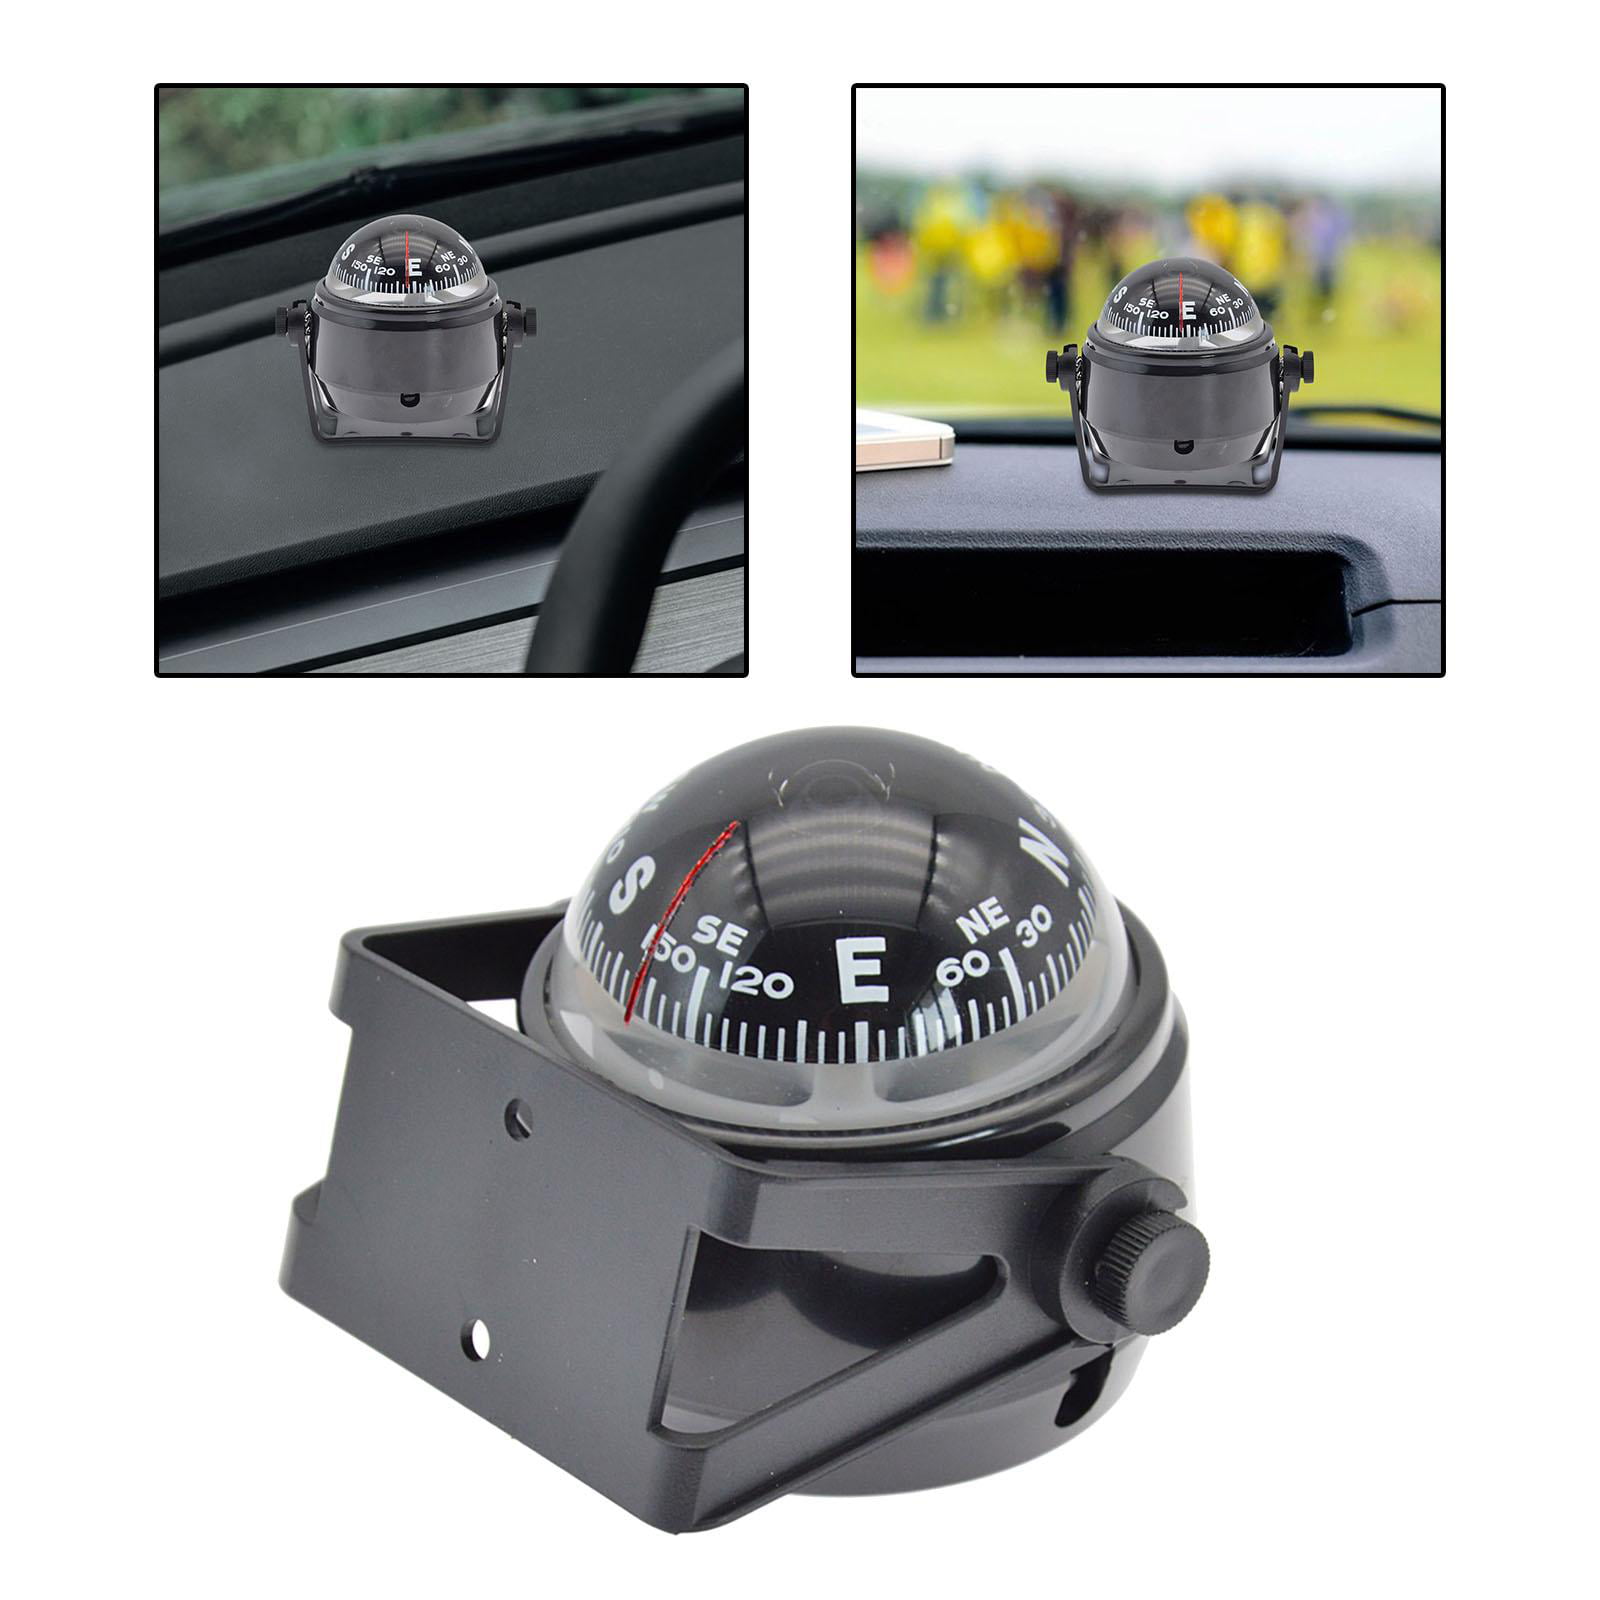 Car Compass,Boat Dashboard Navigation Marine Pivoting Compass Voyager Bracket Mount Compass Color : White 